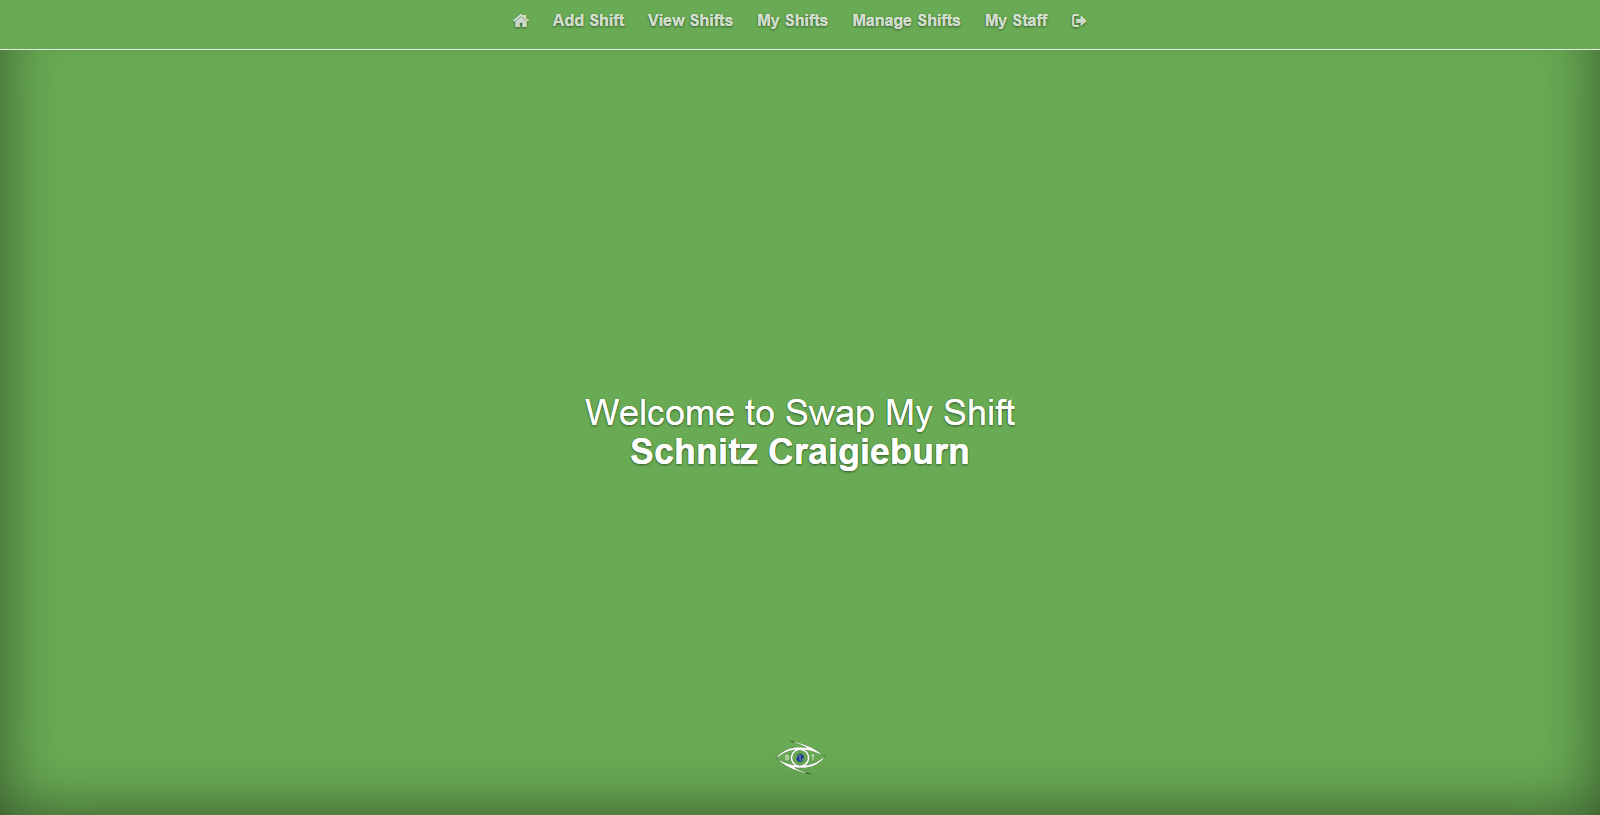 Swap My Shift's Home Page